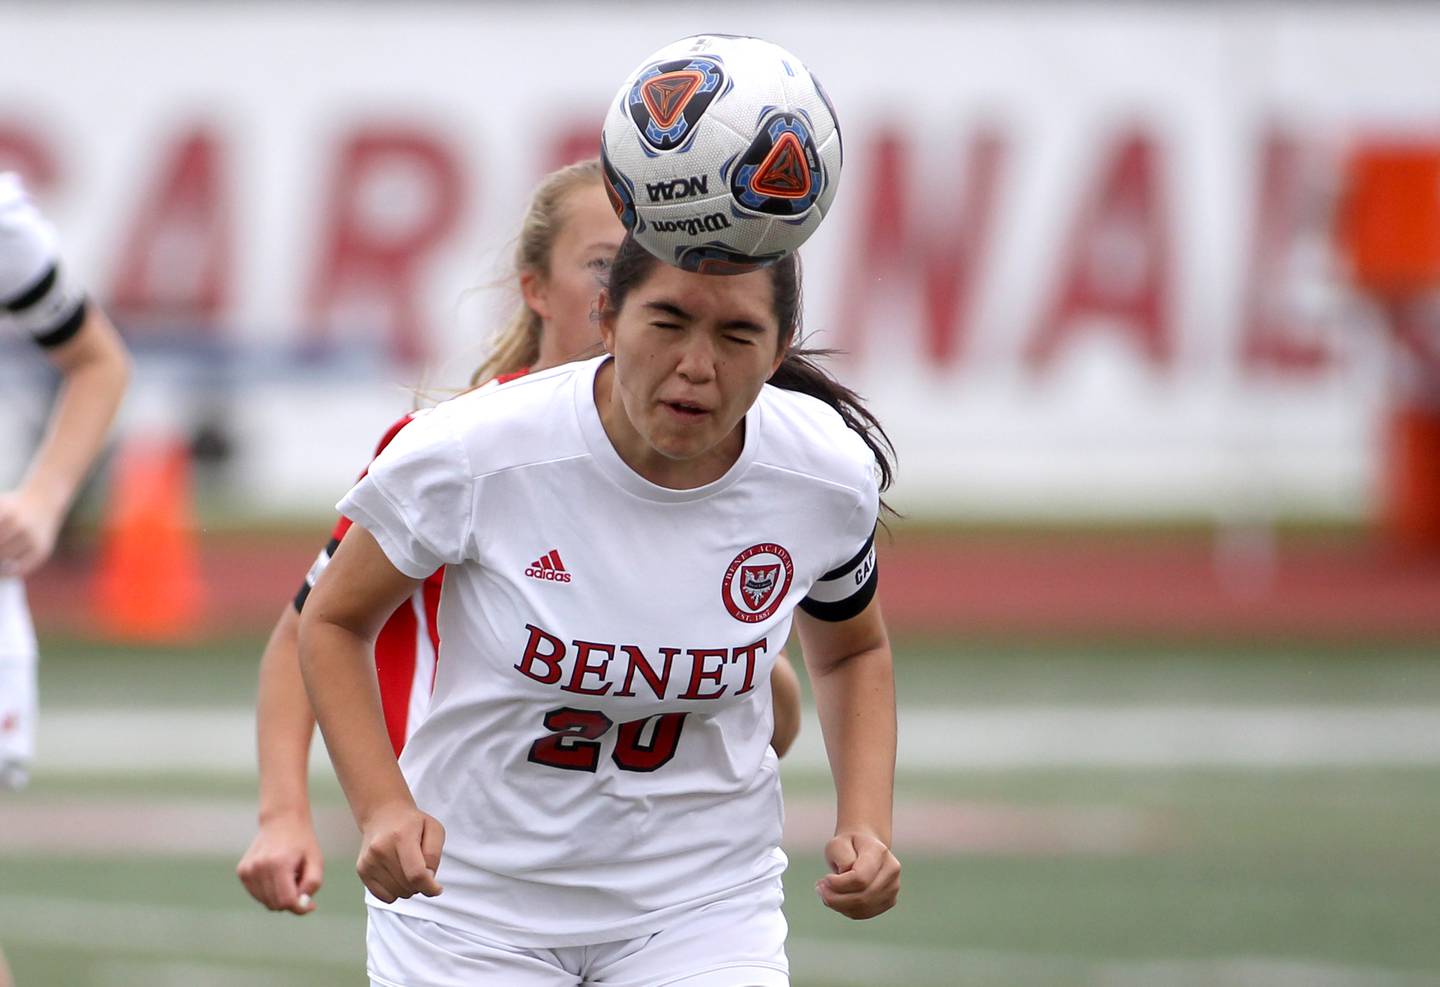 Benet’s Annastacia Thiel (20) heads the ball during the IHSA Class 2A state championship game against Triad at North Central College in Naperville on Saturday, June 4, 2022.